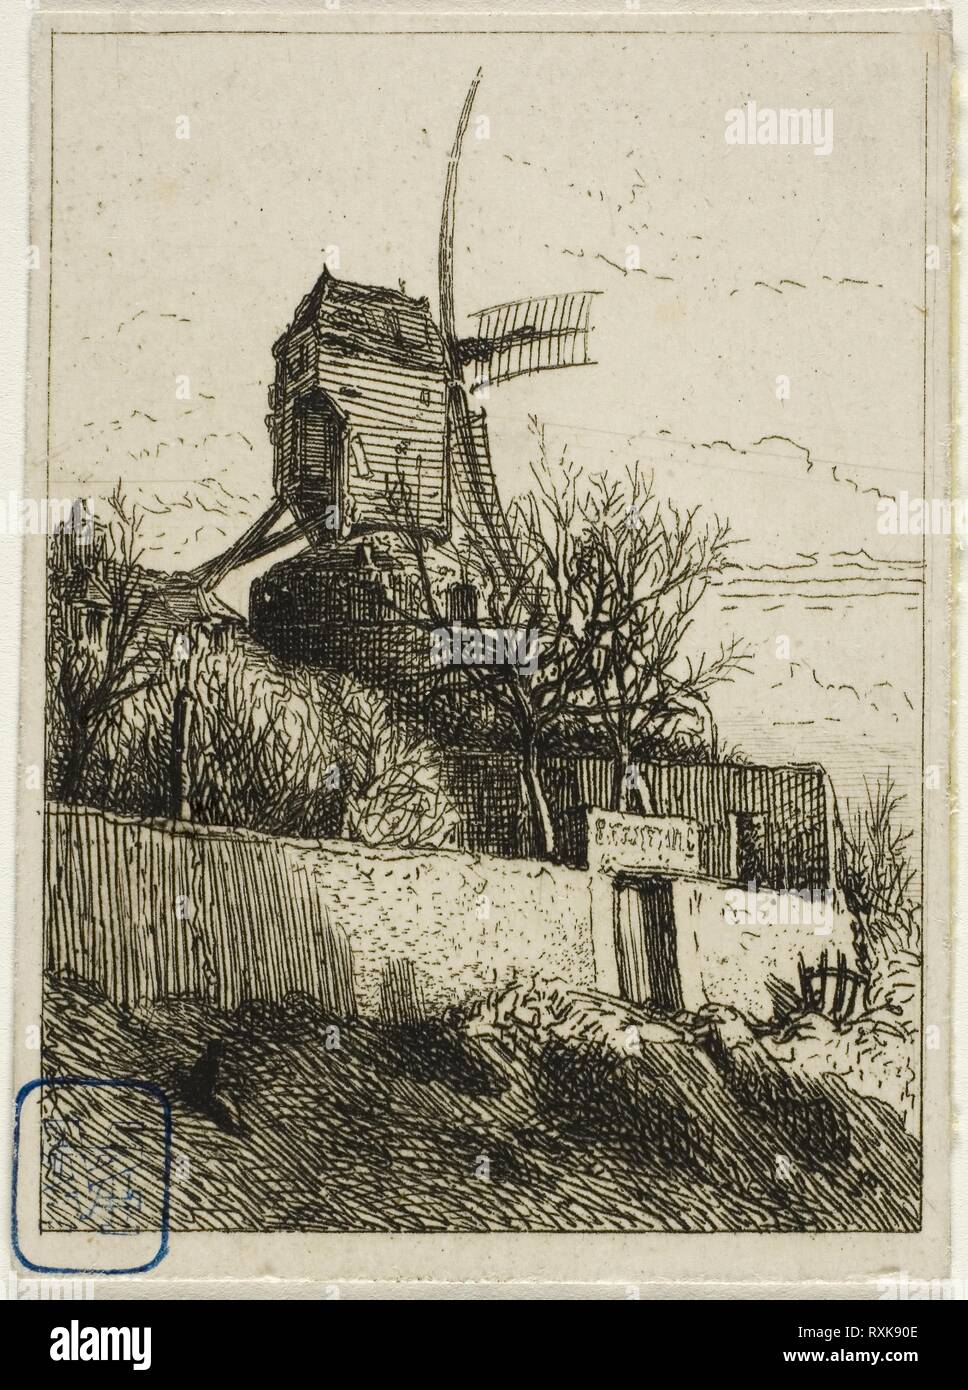 Little Mill at Montmartre. Charles Émile Jacque; French, 1813-1894. Date: 1842. Dimensions: 63 × 46 mm (image); 67 × 49 mm (sheet). Etching on ivory wove paper. Origin: France. Museum: The Chicago Art Institute. Stock Photo